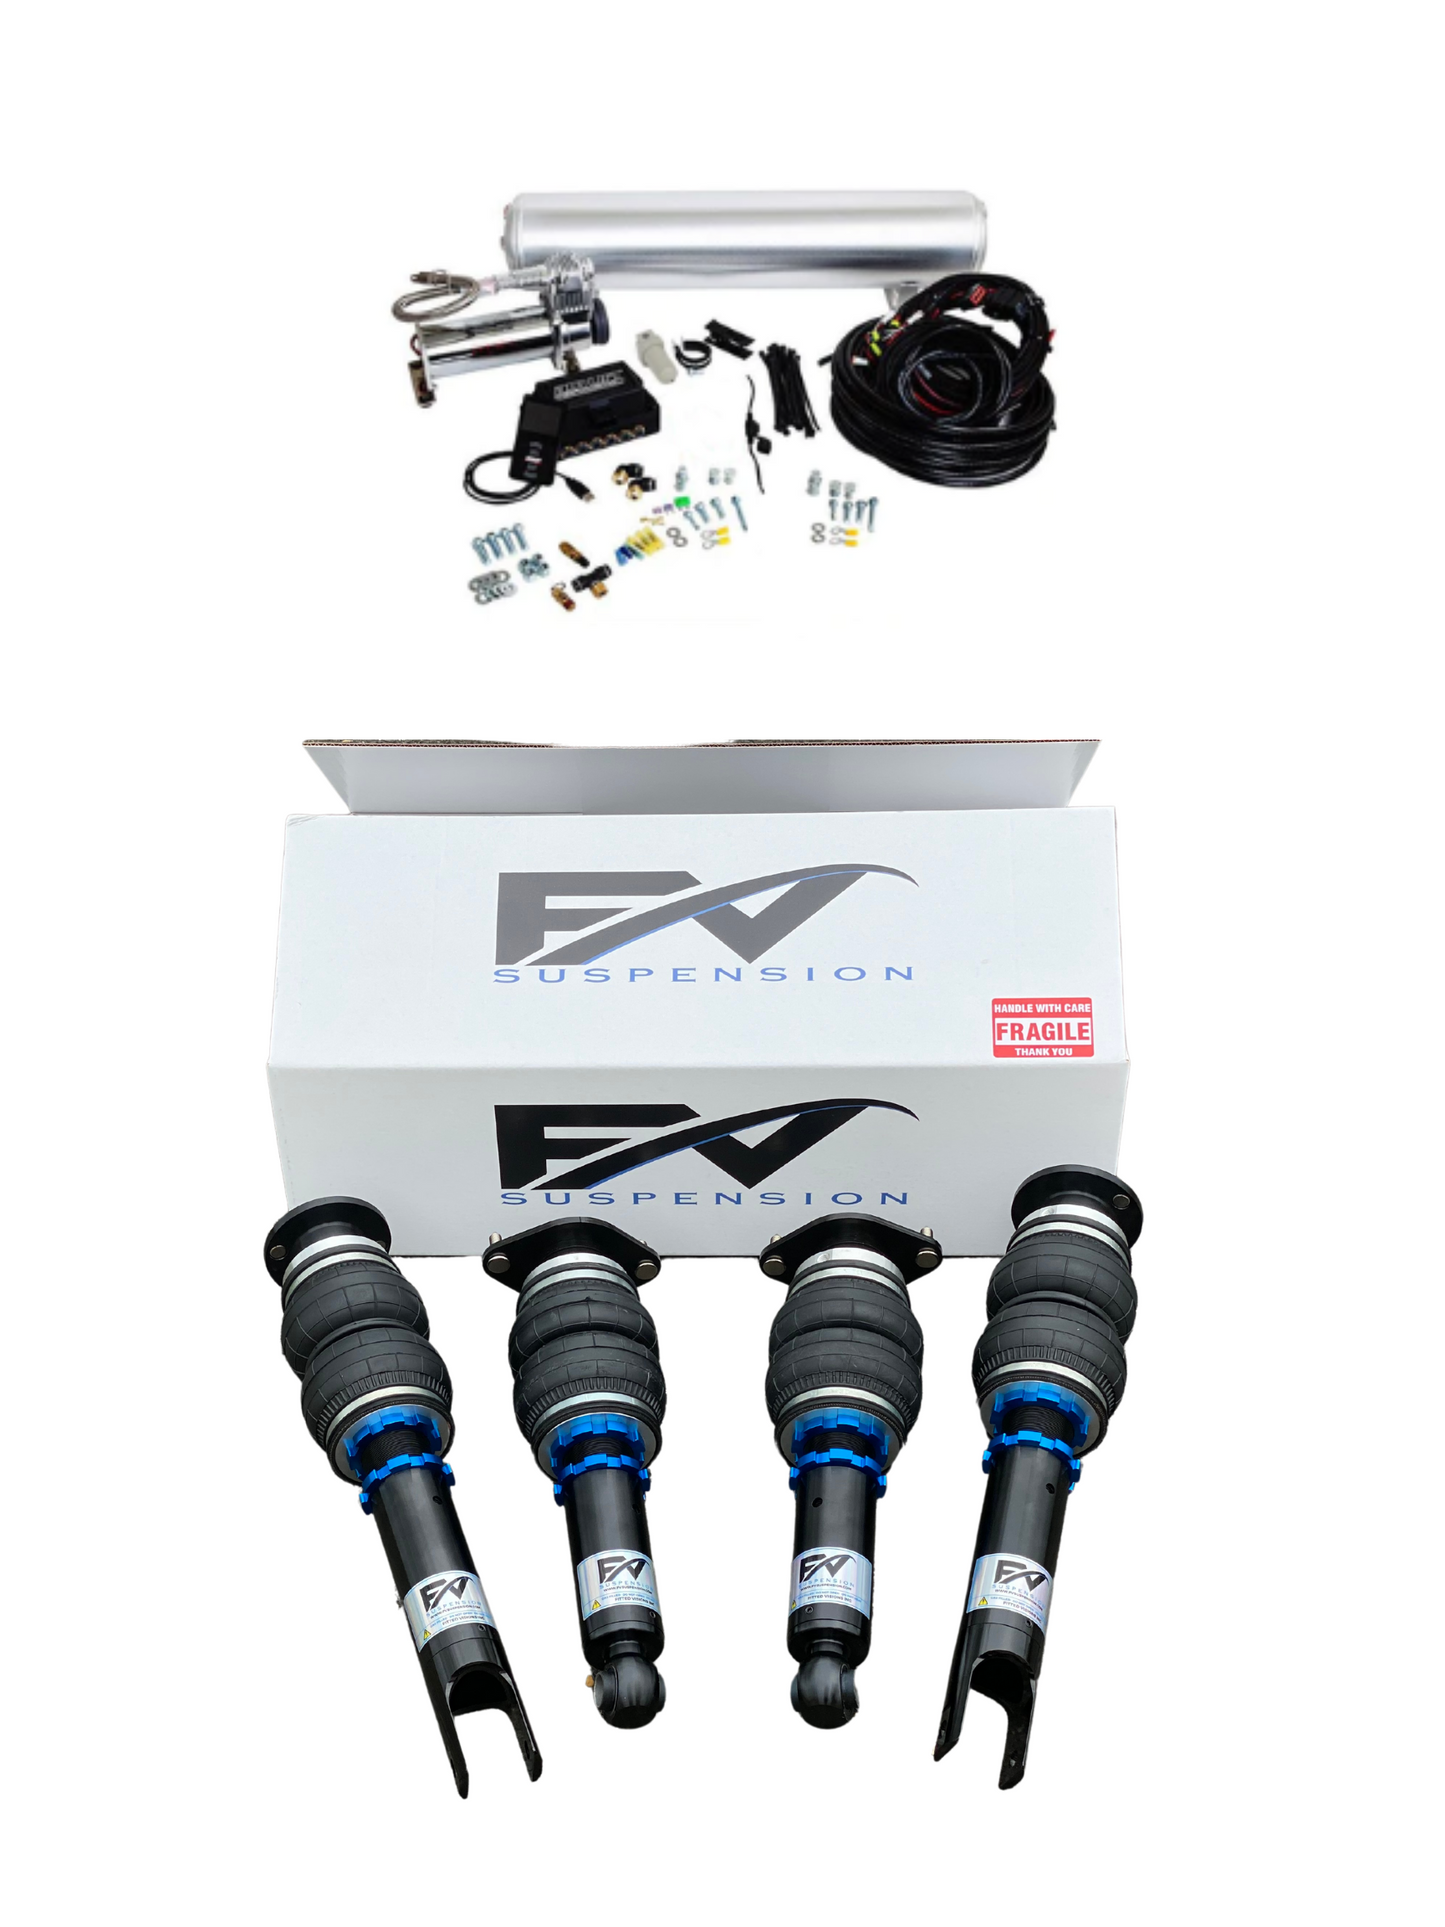 FV Suspension 3P Tier 2 Complete Air Ride kit for 07-15 Toyota Corolla Rumion - FVALtier2kit667